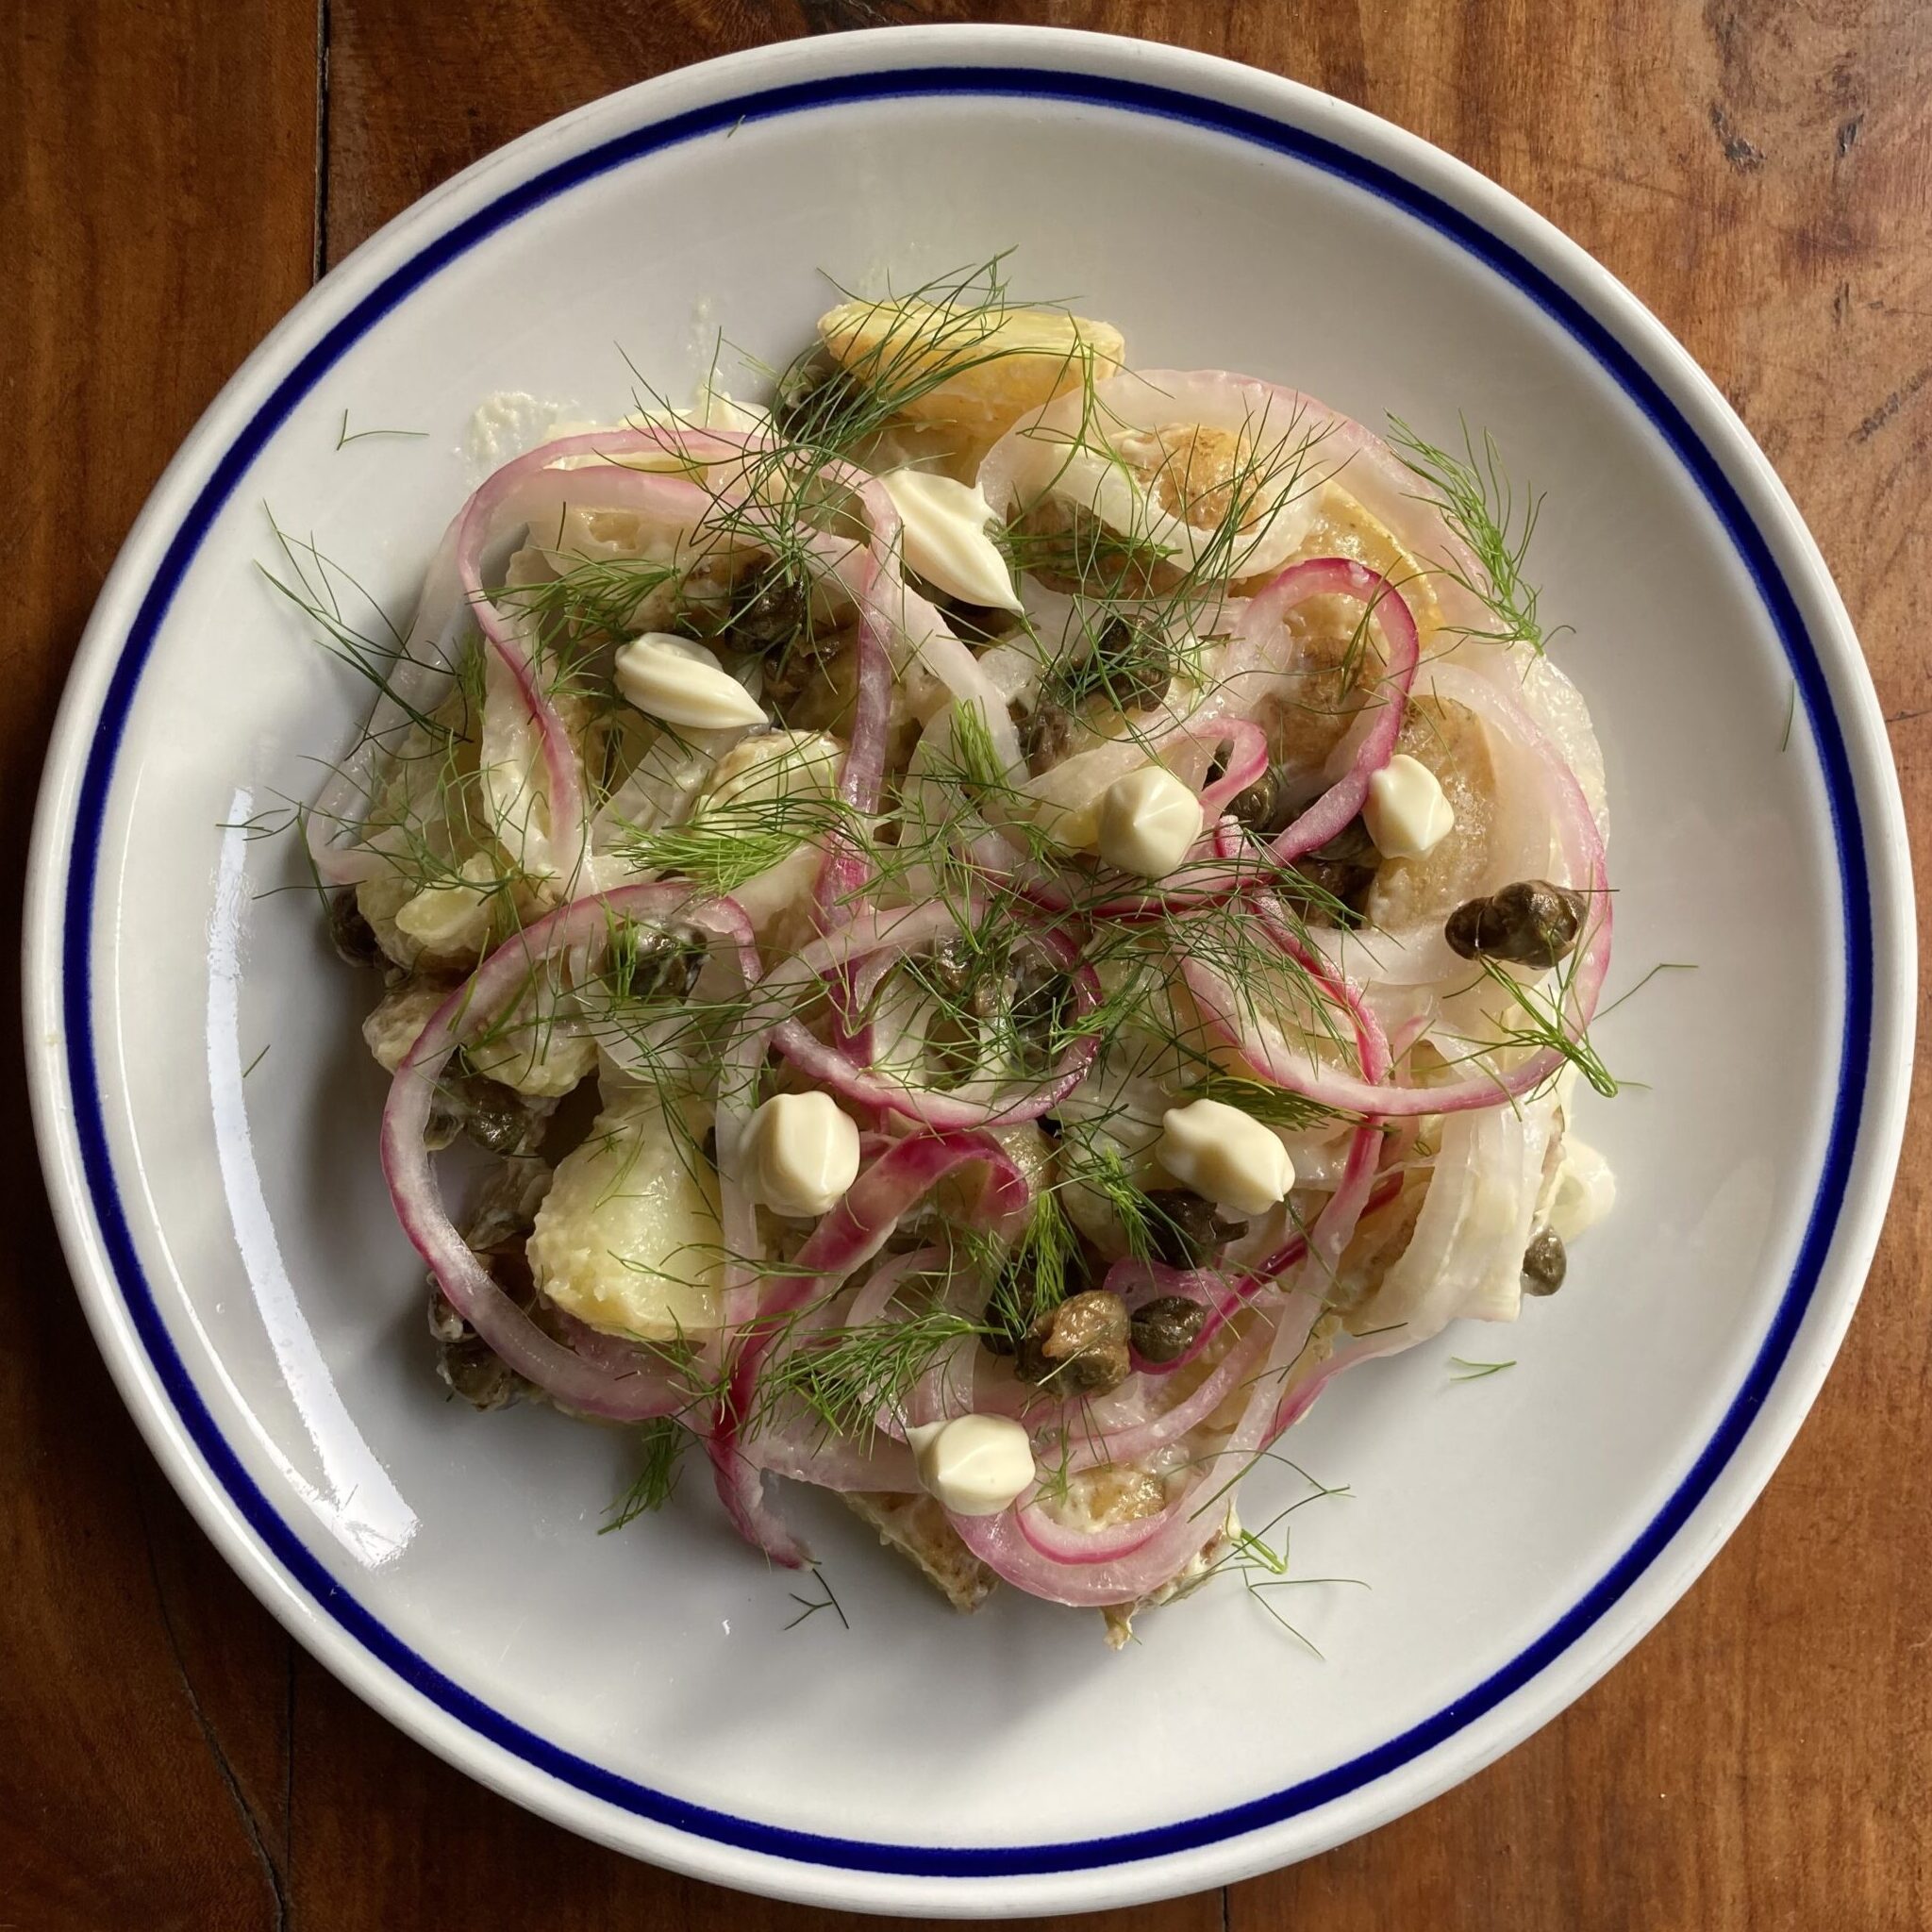 A white ceramic plate layered with wedges of potatoes, pickled red onions, capers, dollops of mayonnaise, and fresh fennel fronds.